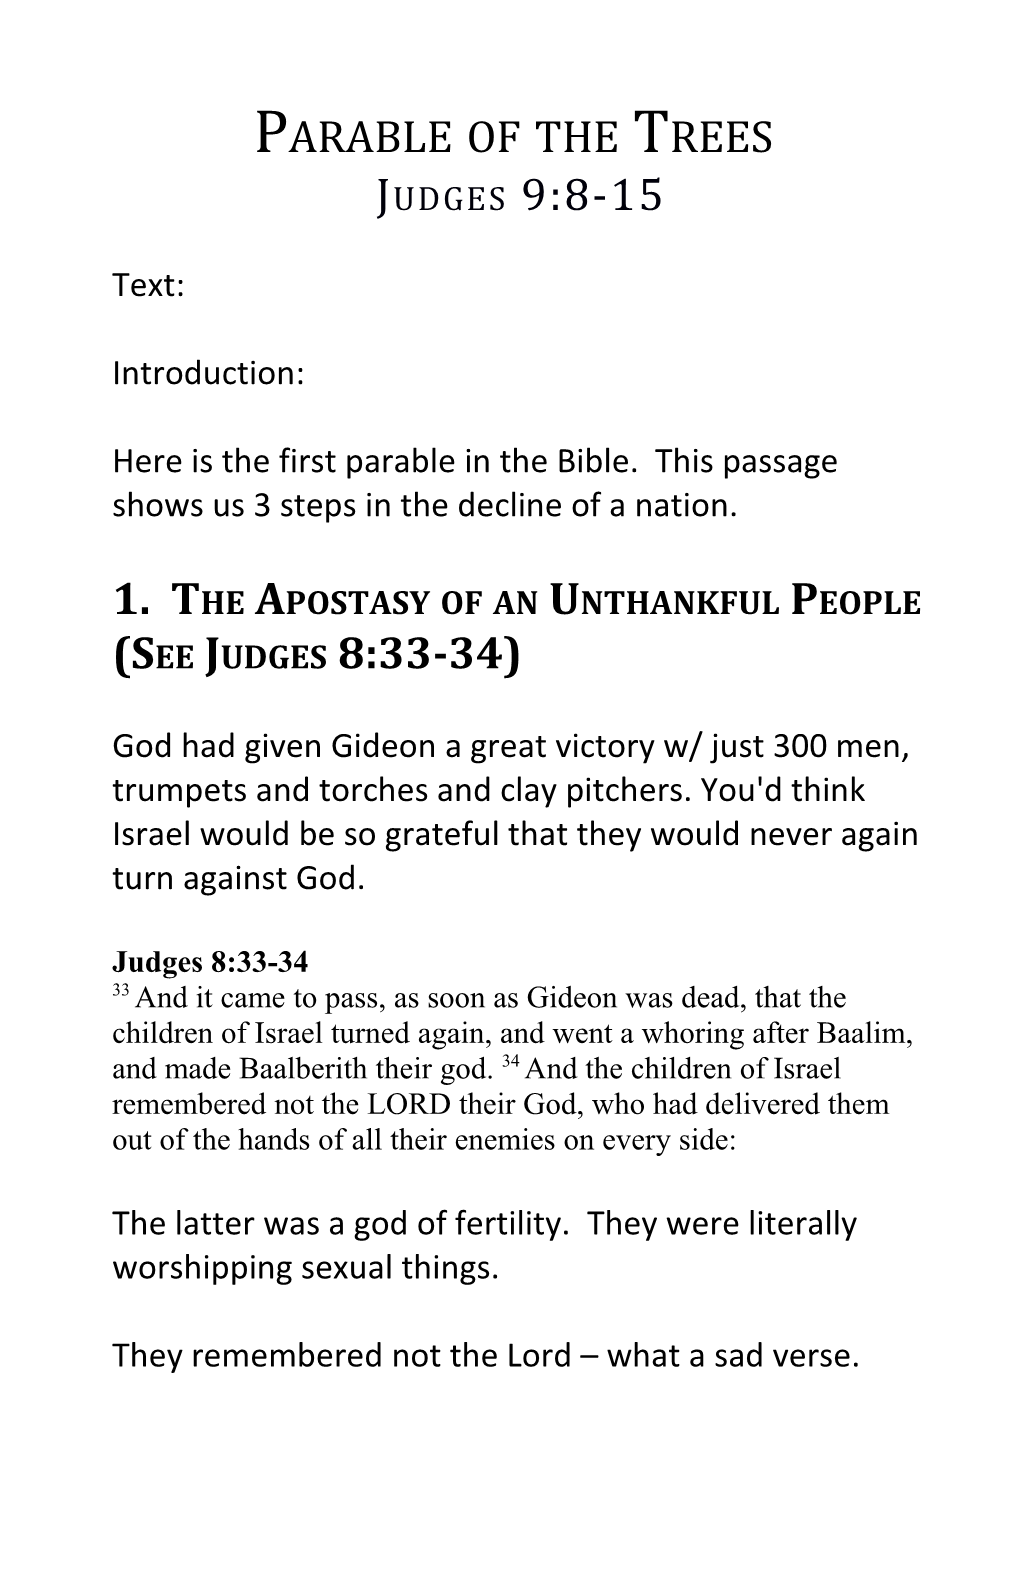 1. the Apostasy of an Unthankful People (See Judges 8:33-34)